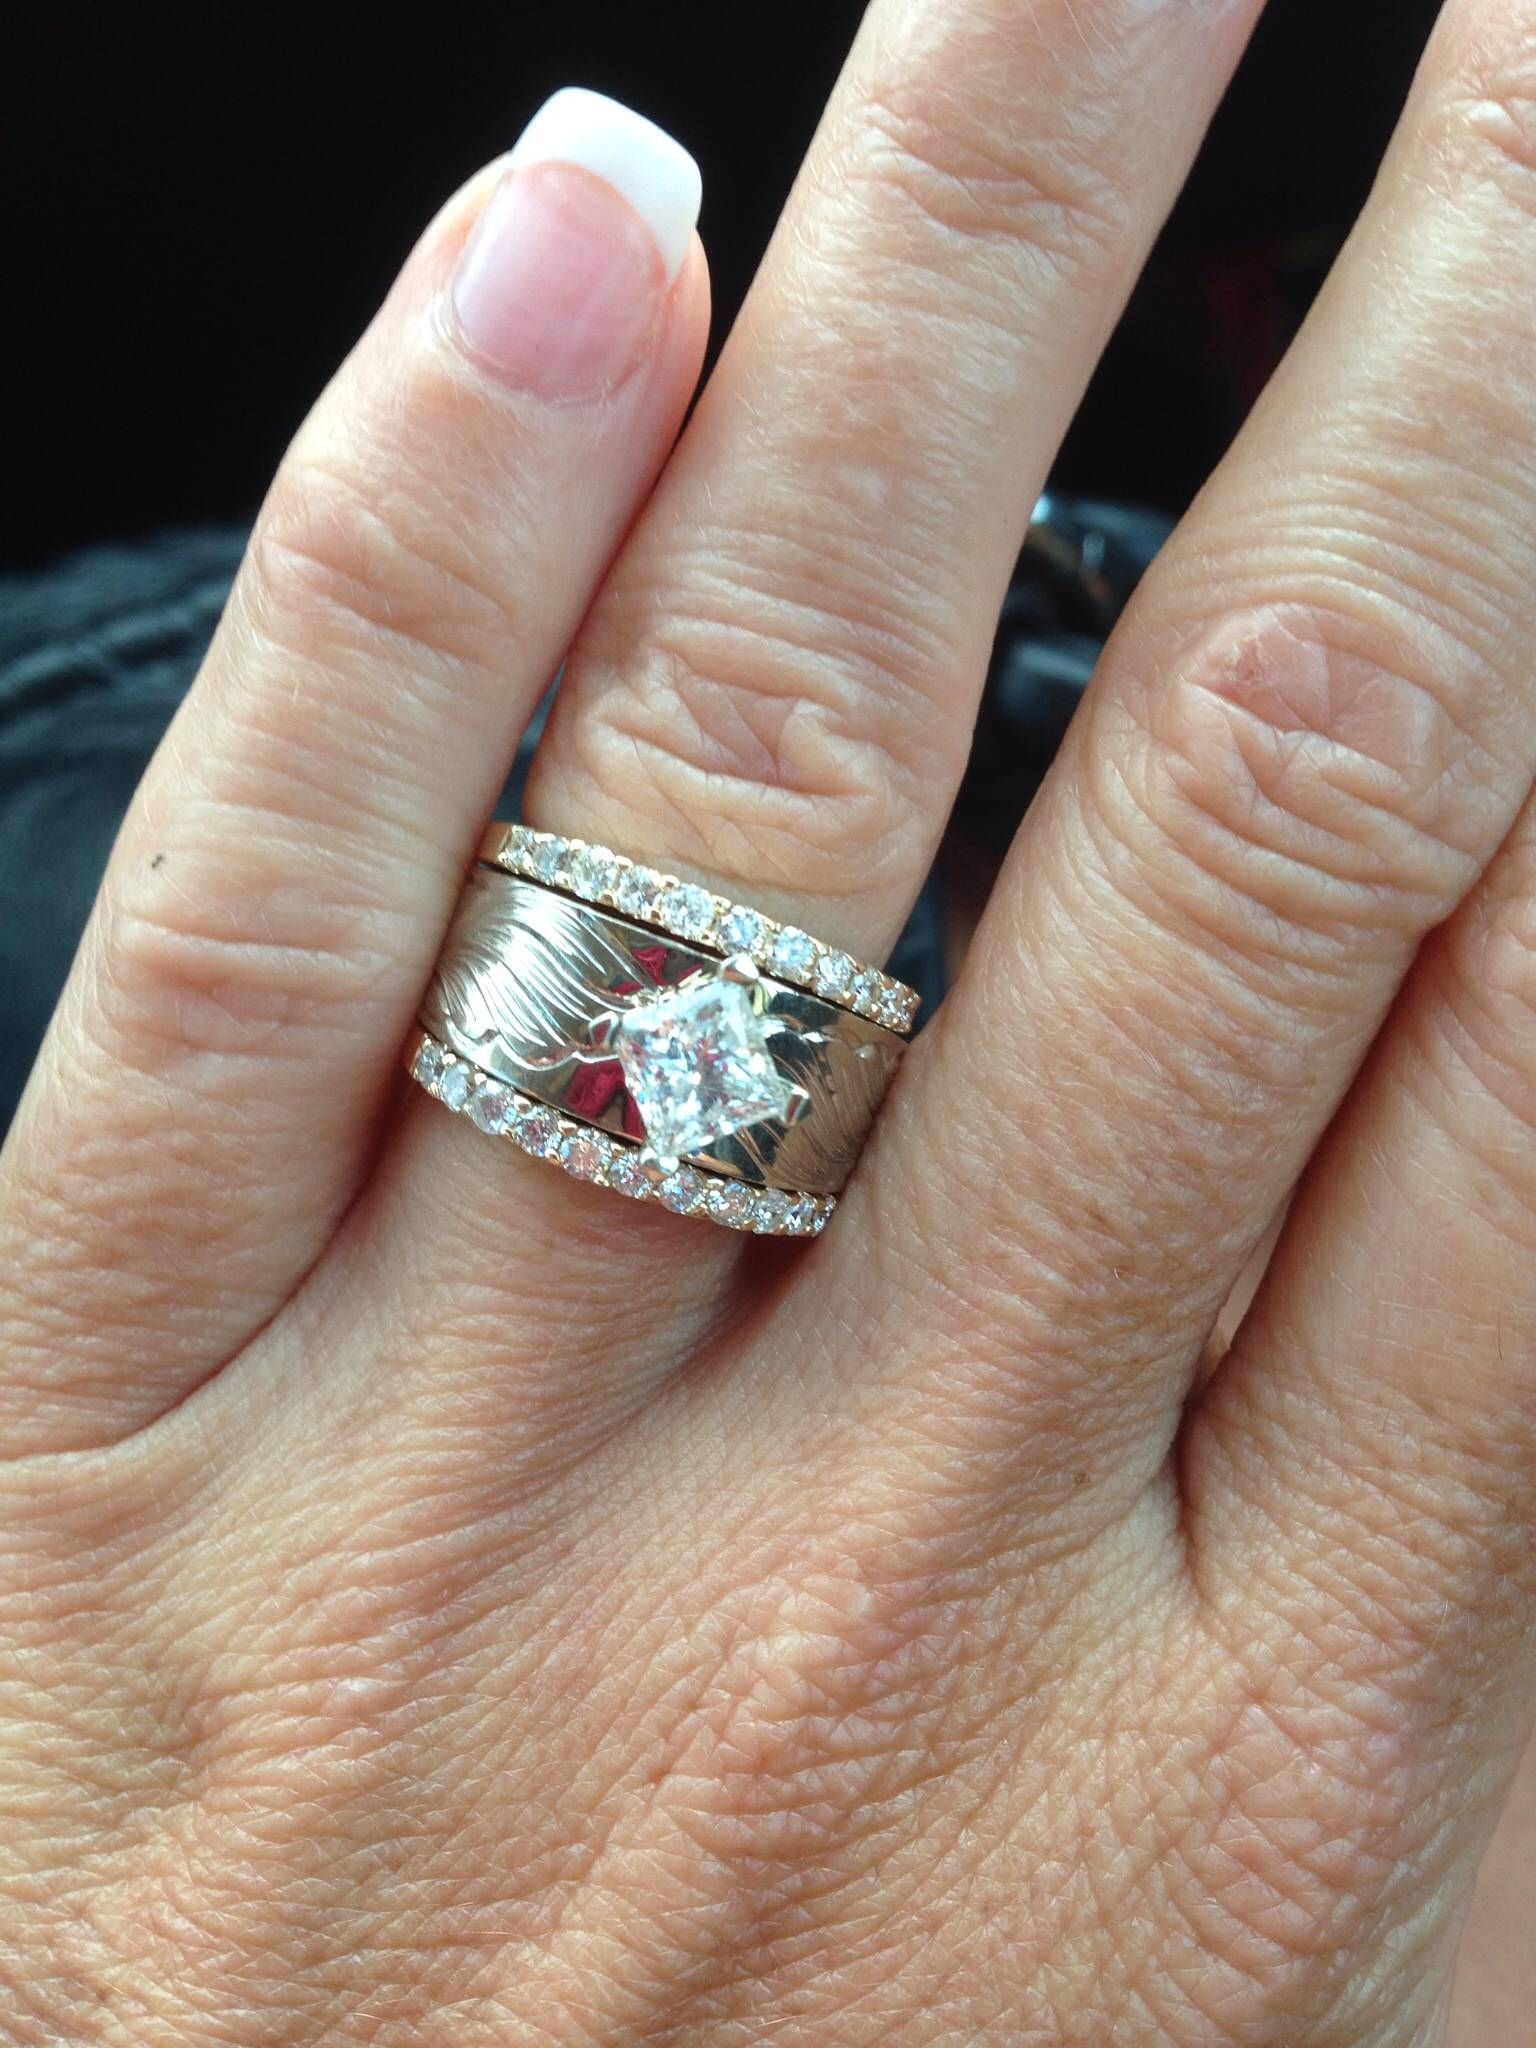 Engagement Rings : Awesome Engagement Ring Emerald Cut My Awesome For Western Wedding Rings (View 10 of 15)